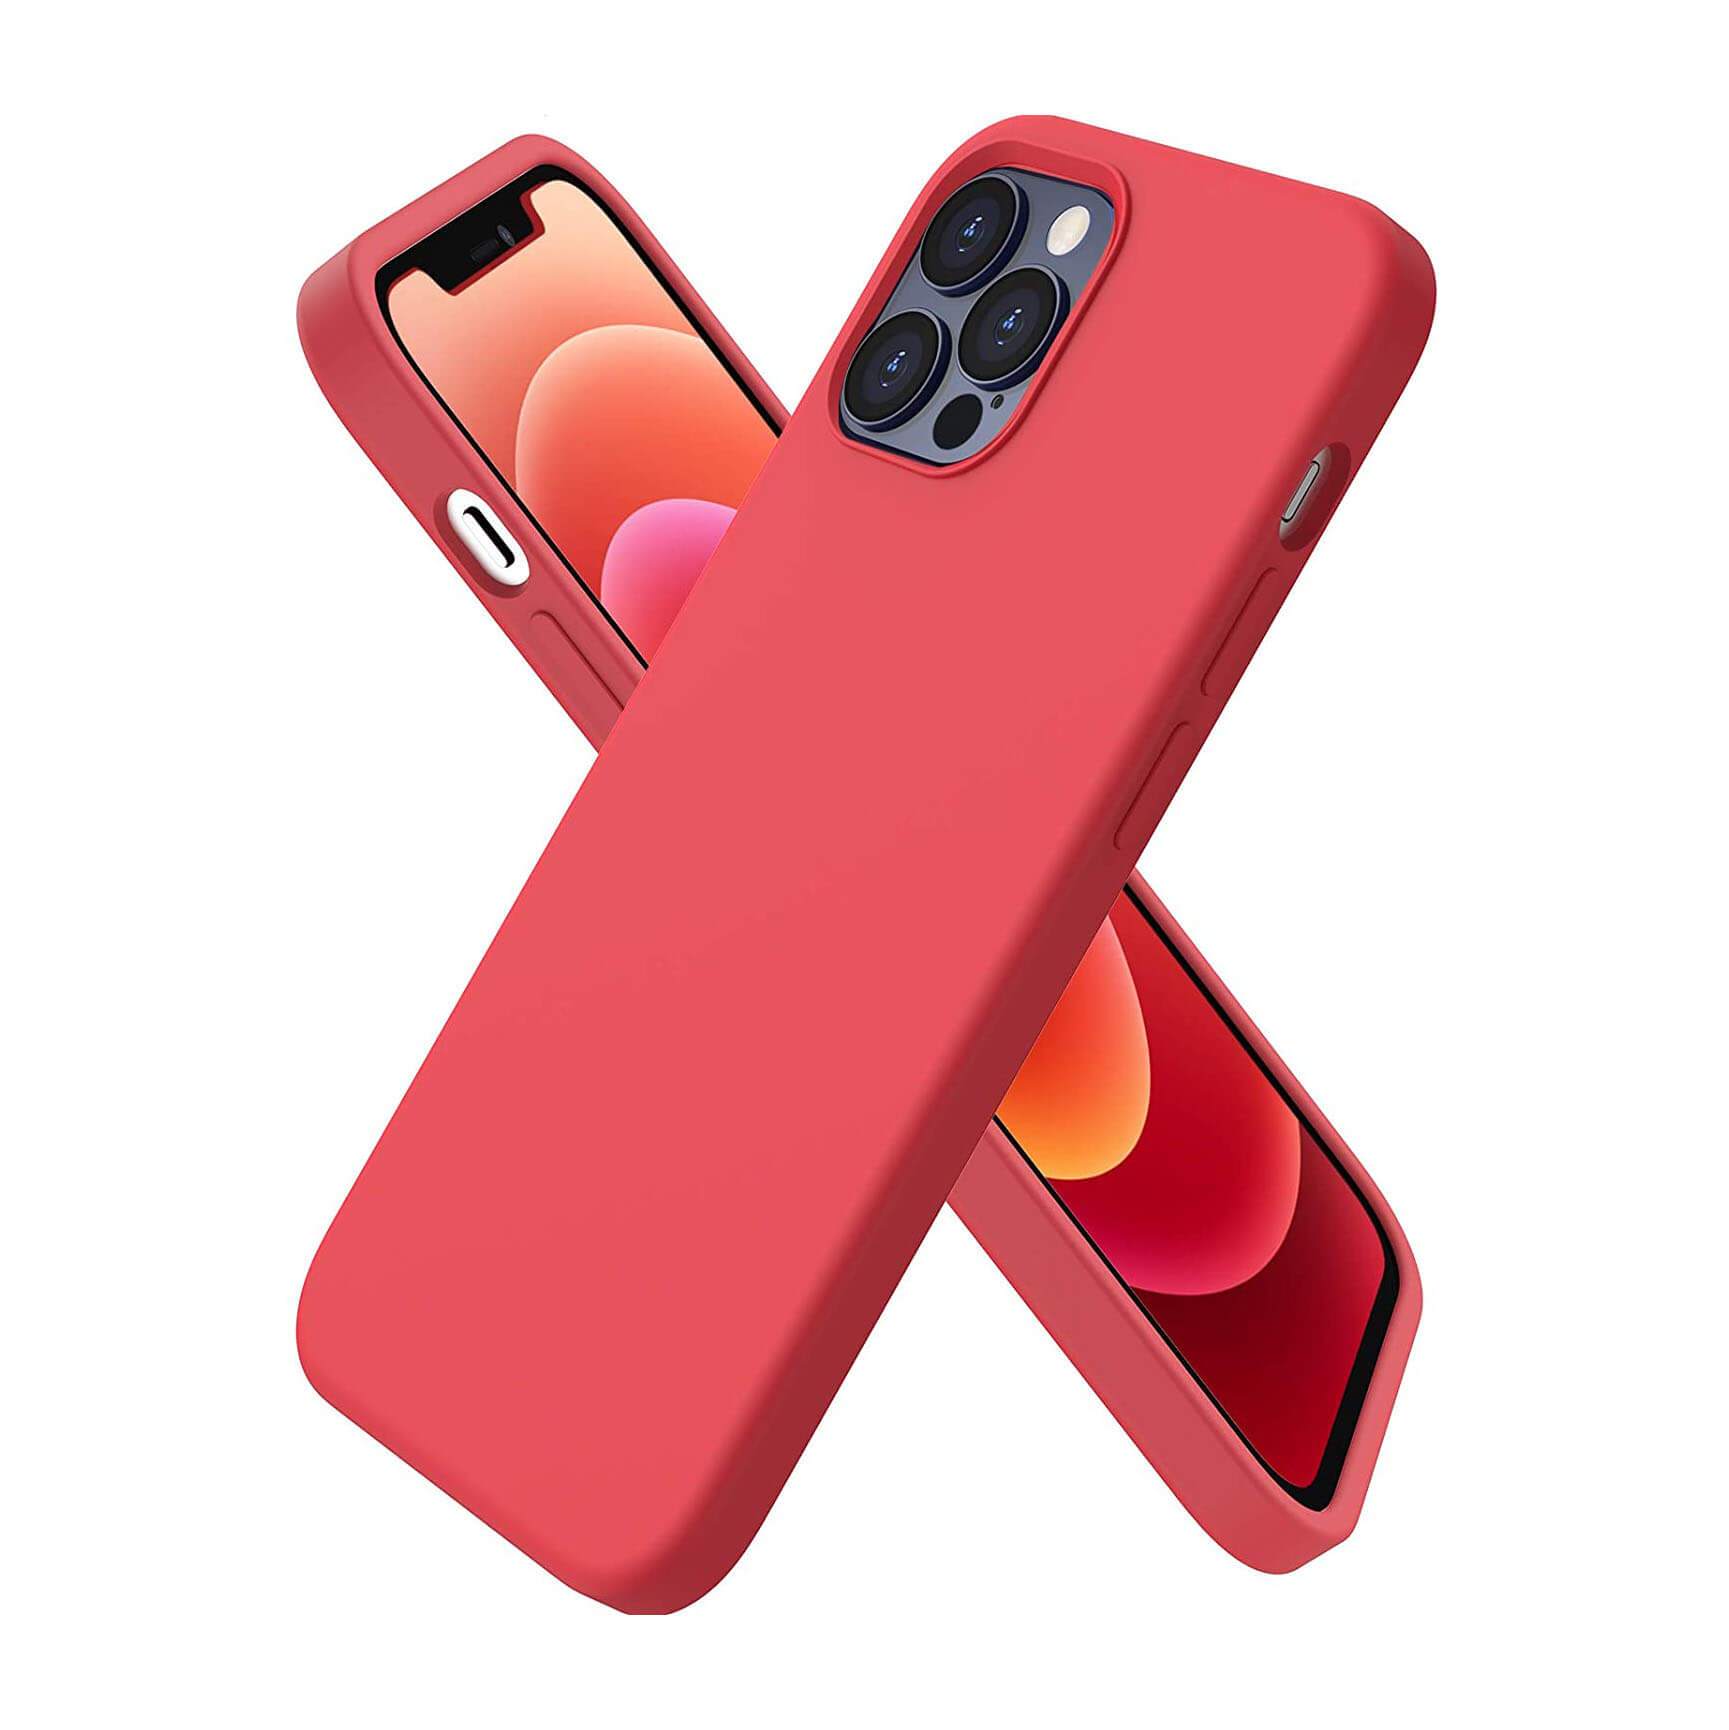 Liquid Silicone Case For Apple iPhone 12 / 12 Pro Luxury Thin Phone Cover Red